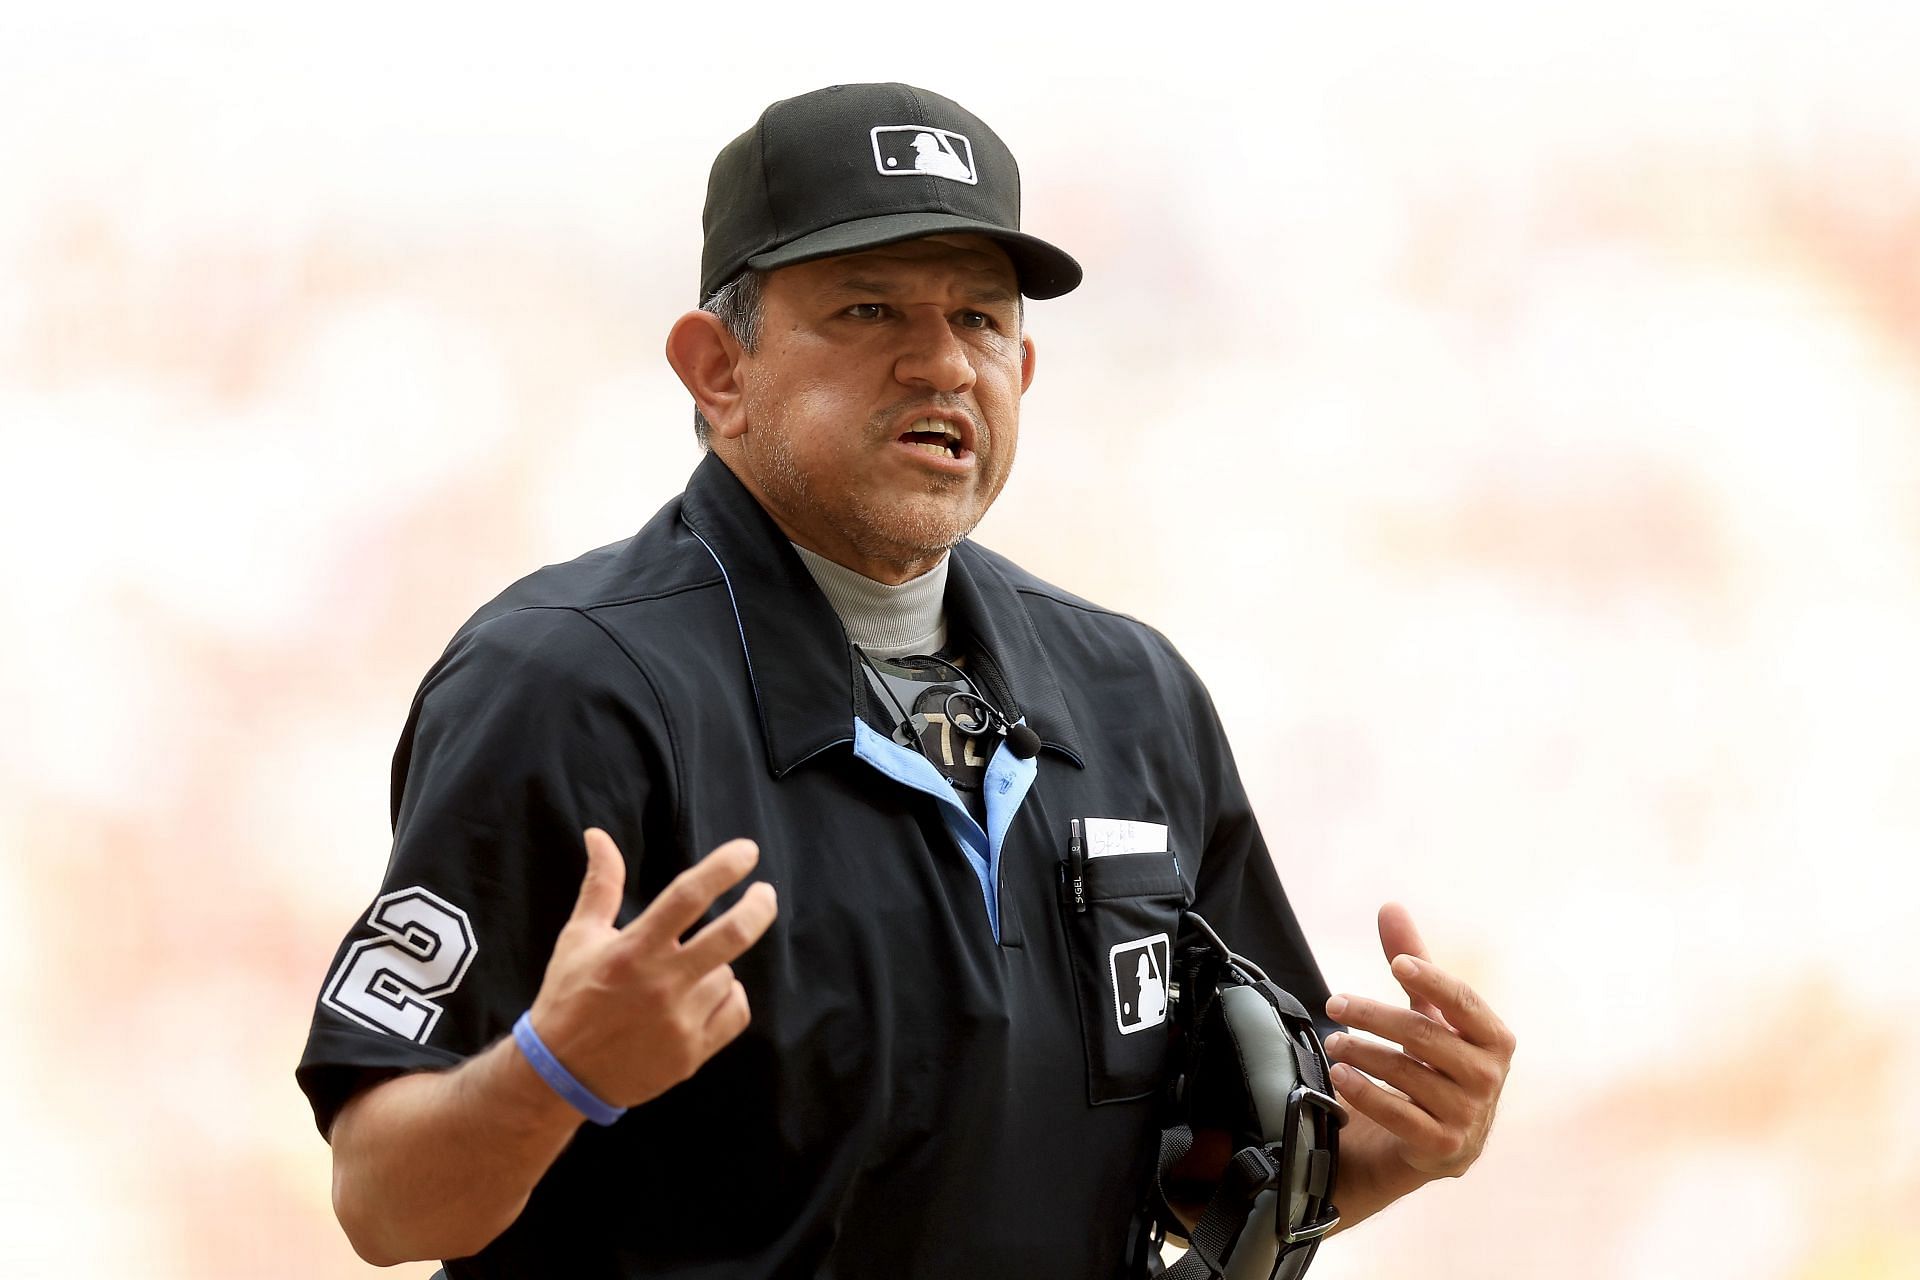 Umpires need to be held accountable for flagrant calls